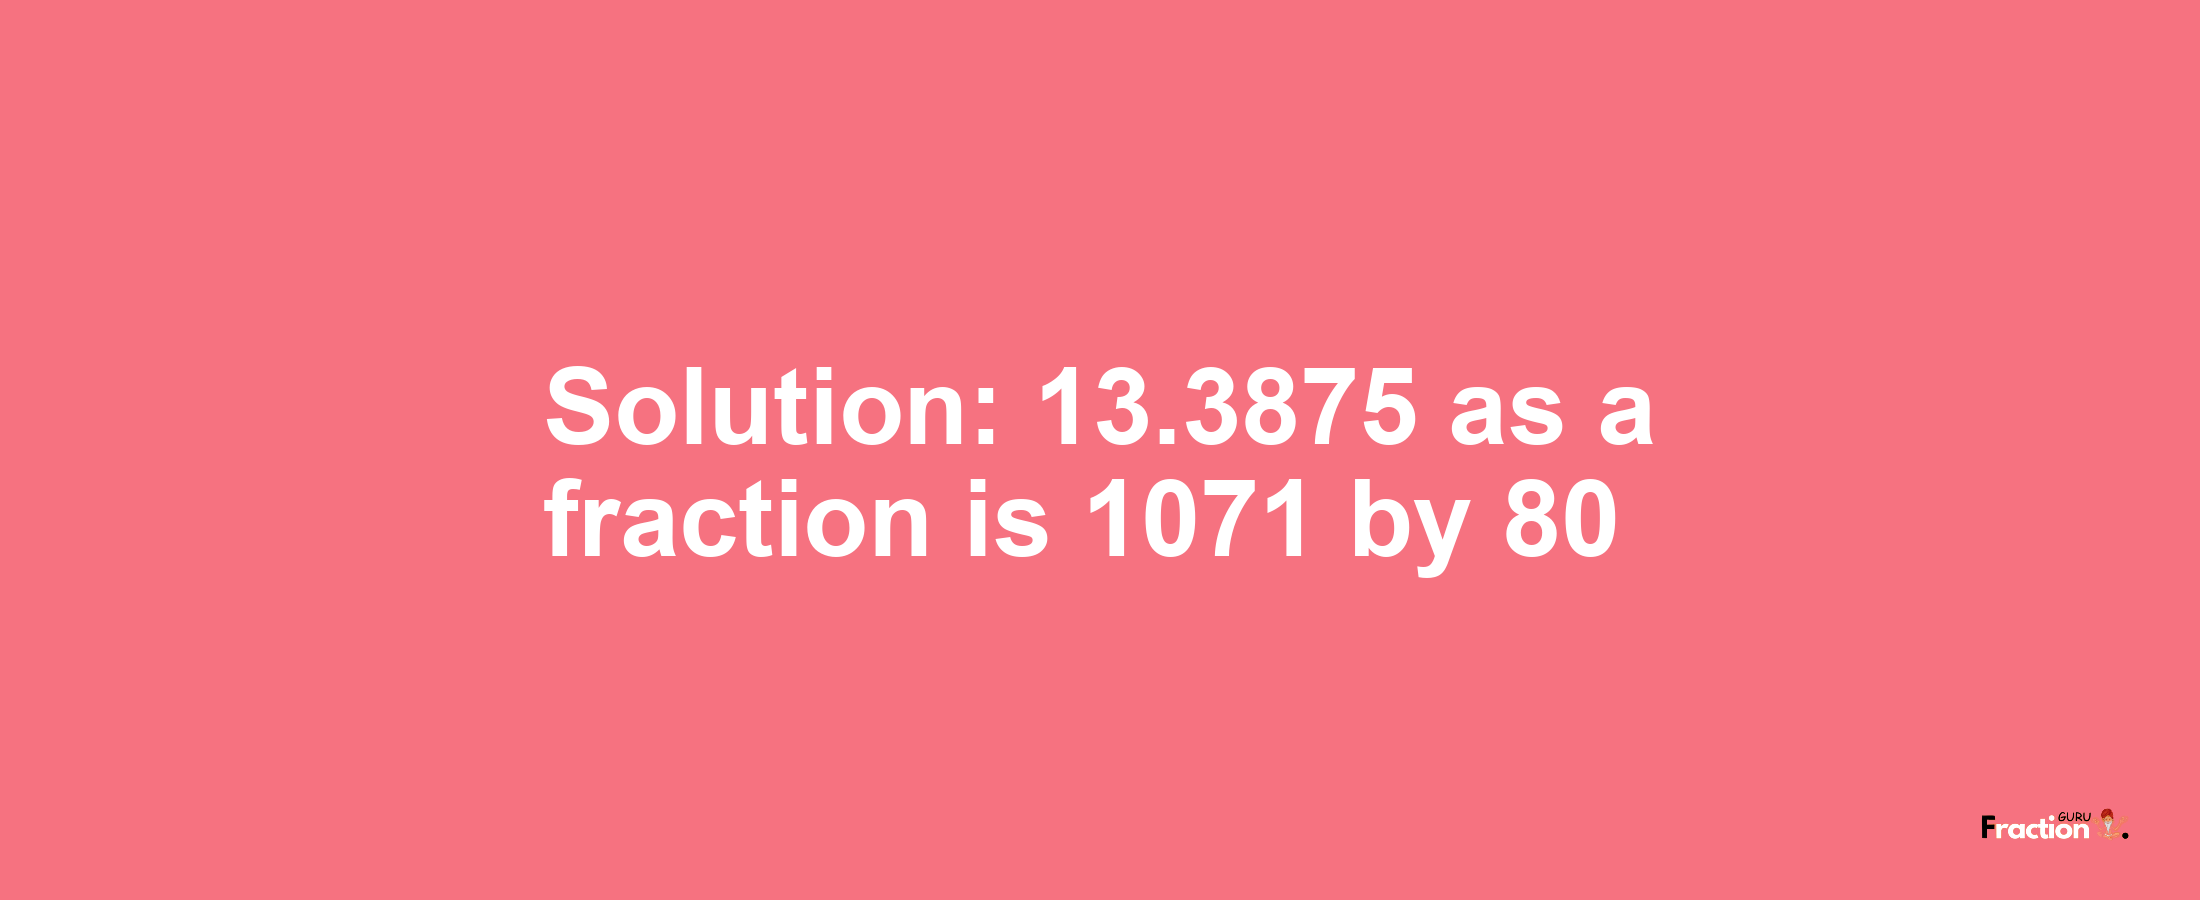 Solution:13.3875 as a fraction is 1071/80